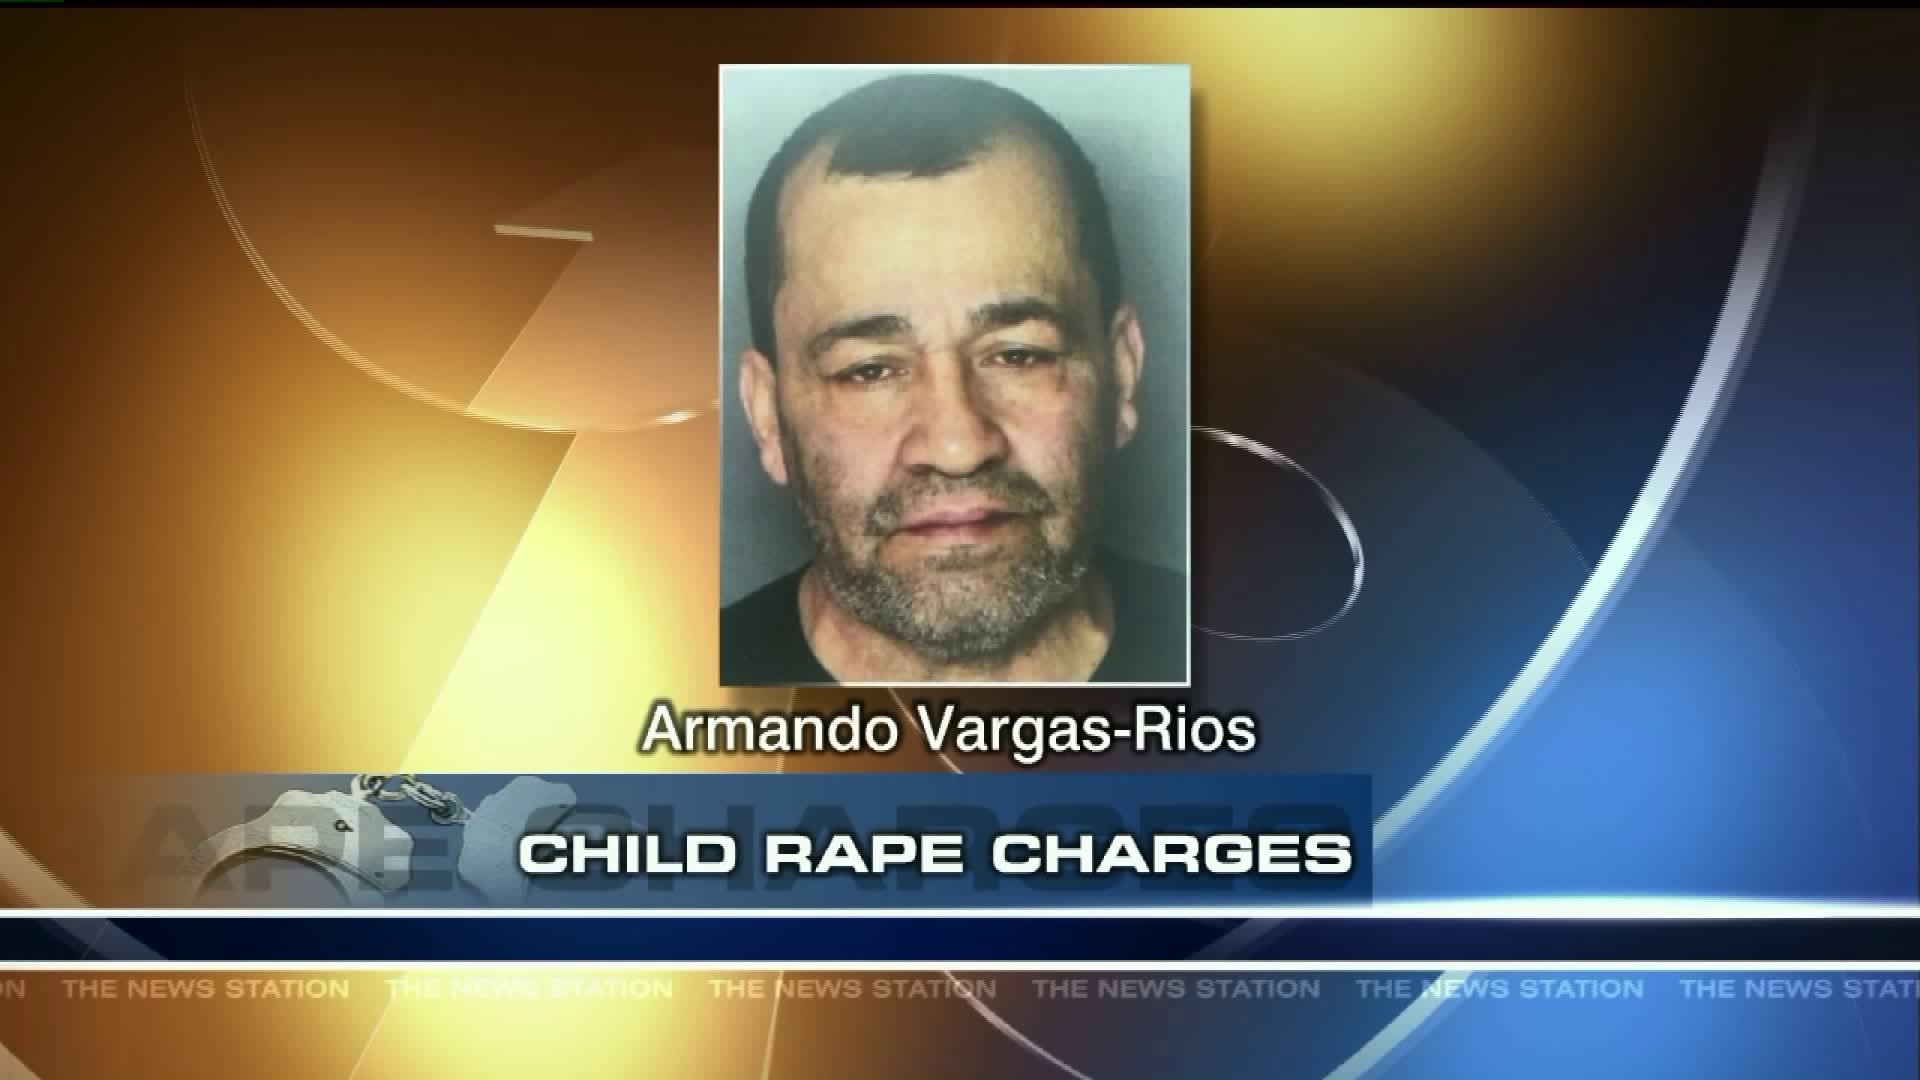 Luzerne County Child Rape Charges